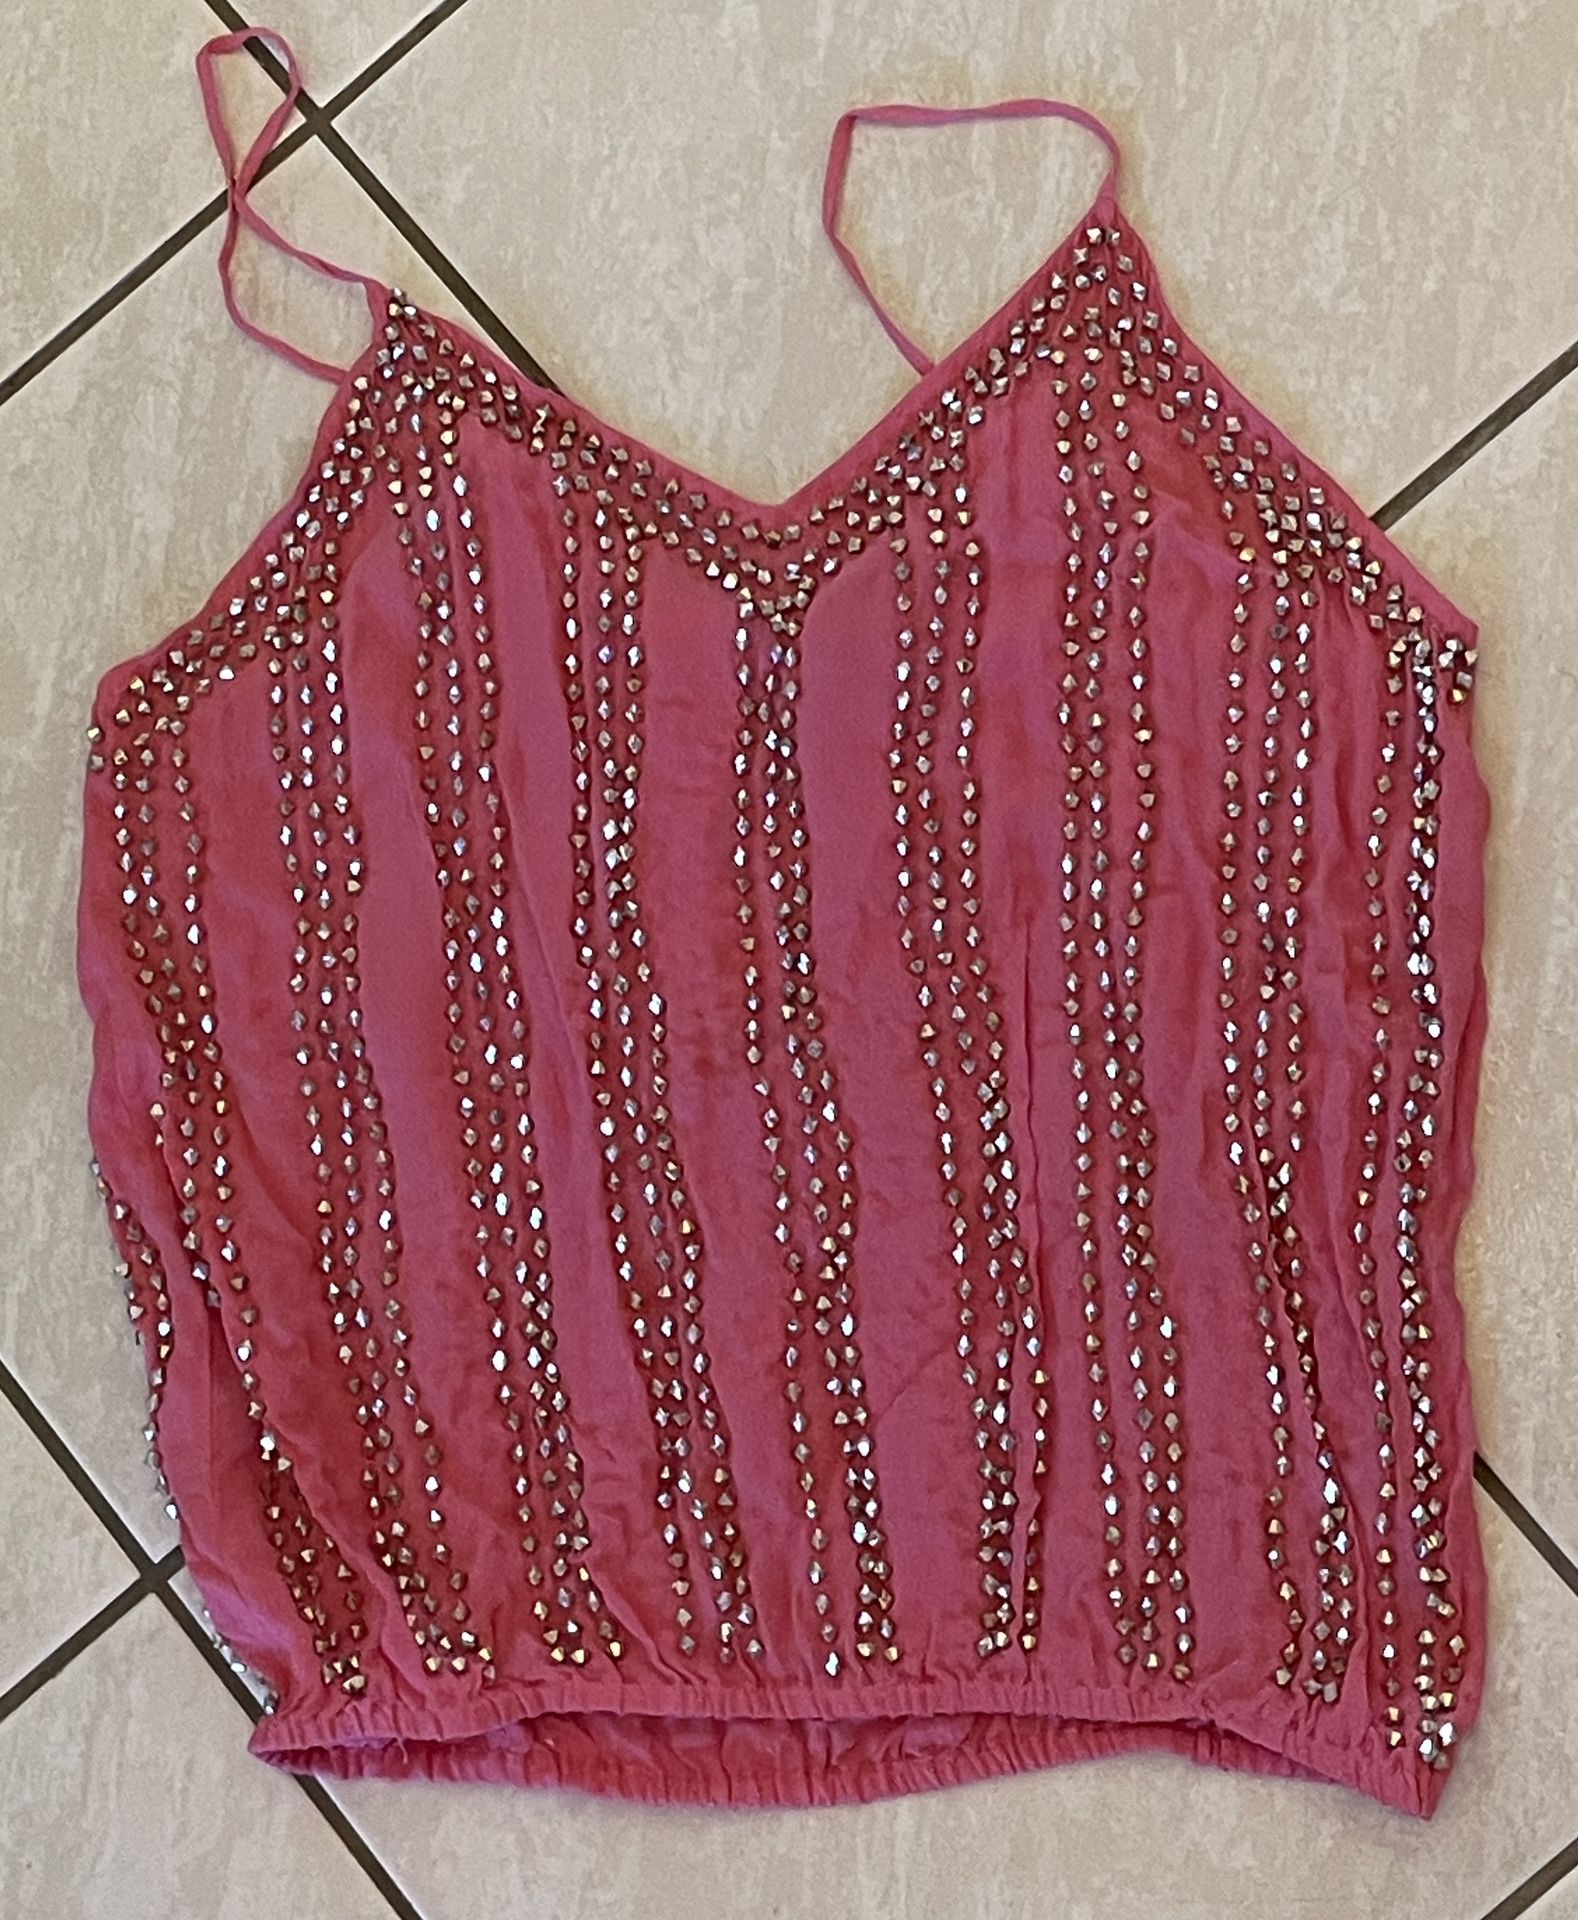 Boyod- Size Medium- Pink Tank Top With Silver Beaded Embellishment -  See images for details and condition  Previously worn and loved, not for many ye